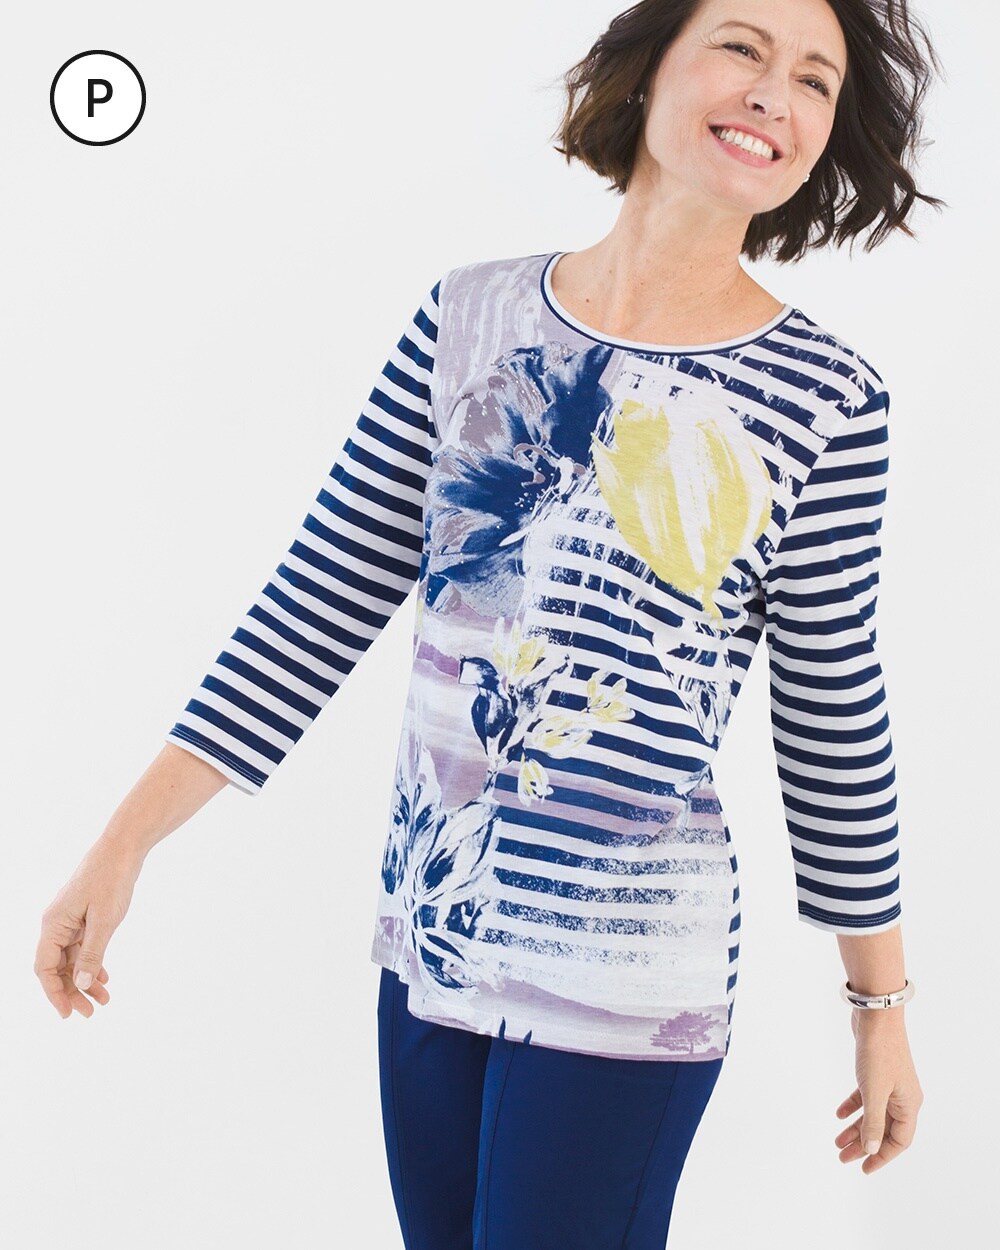 Zenergy Petite Striped Floral Tee